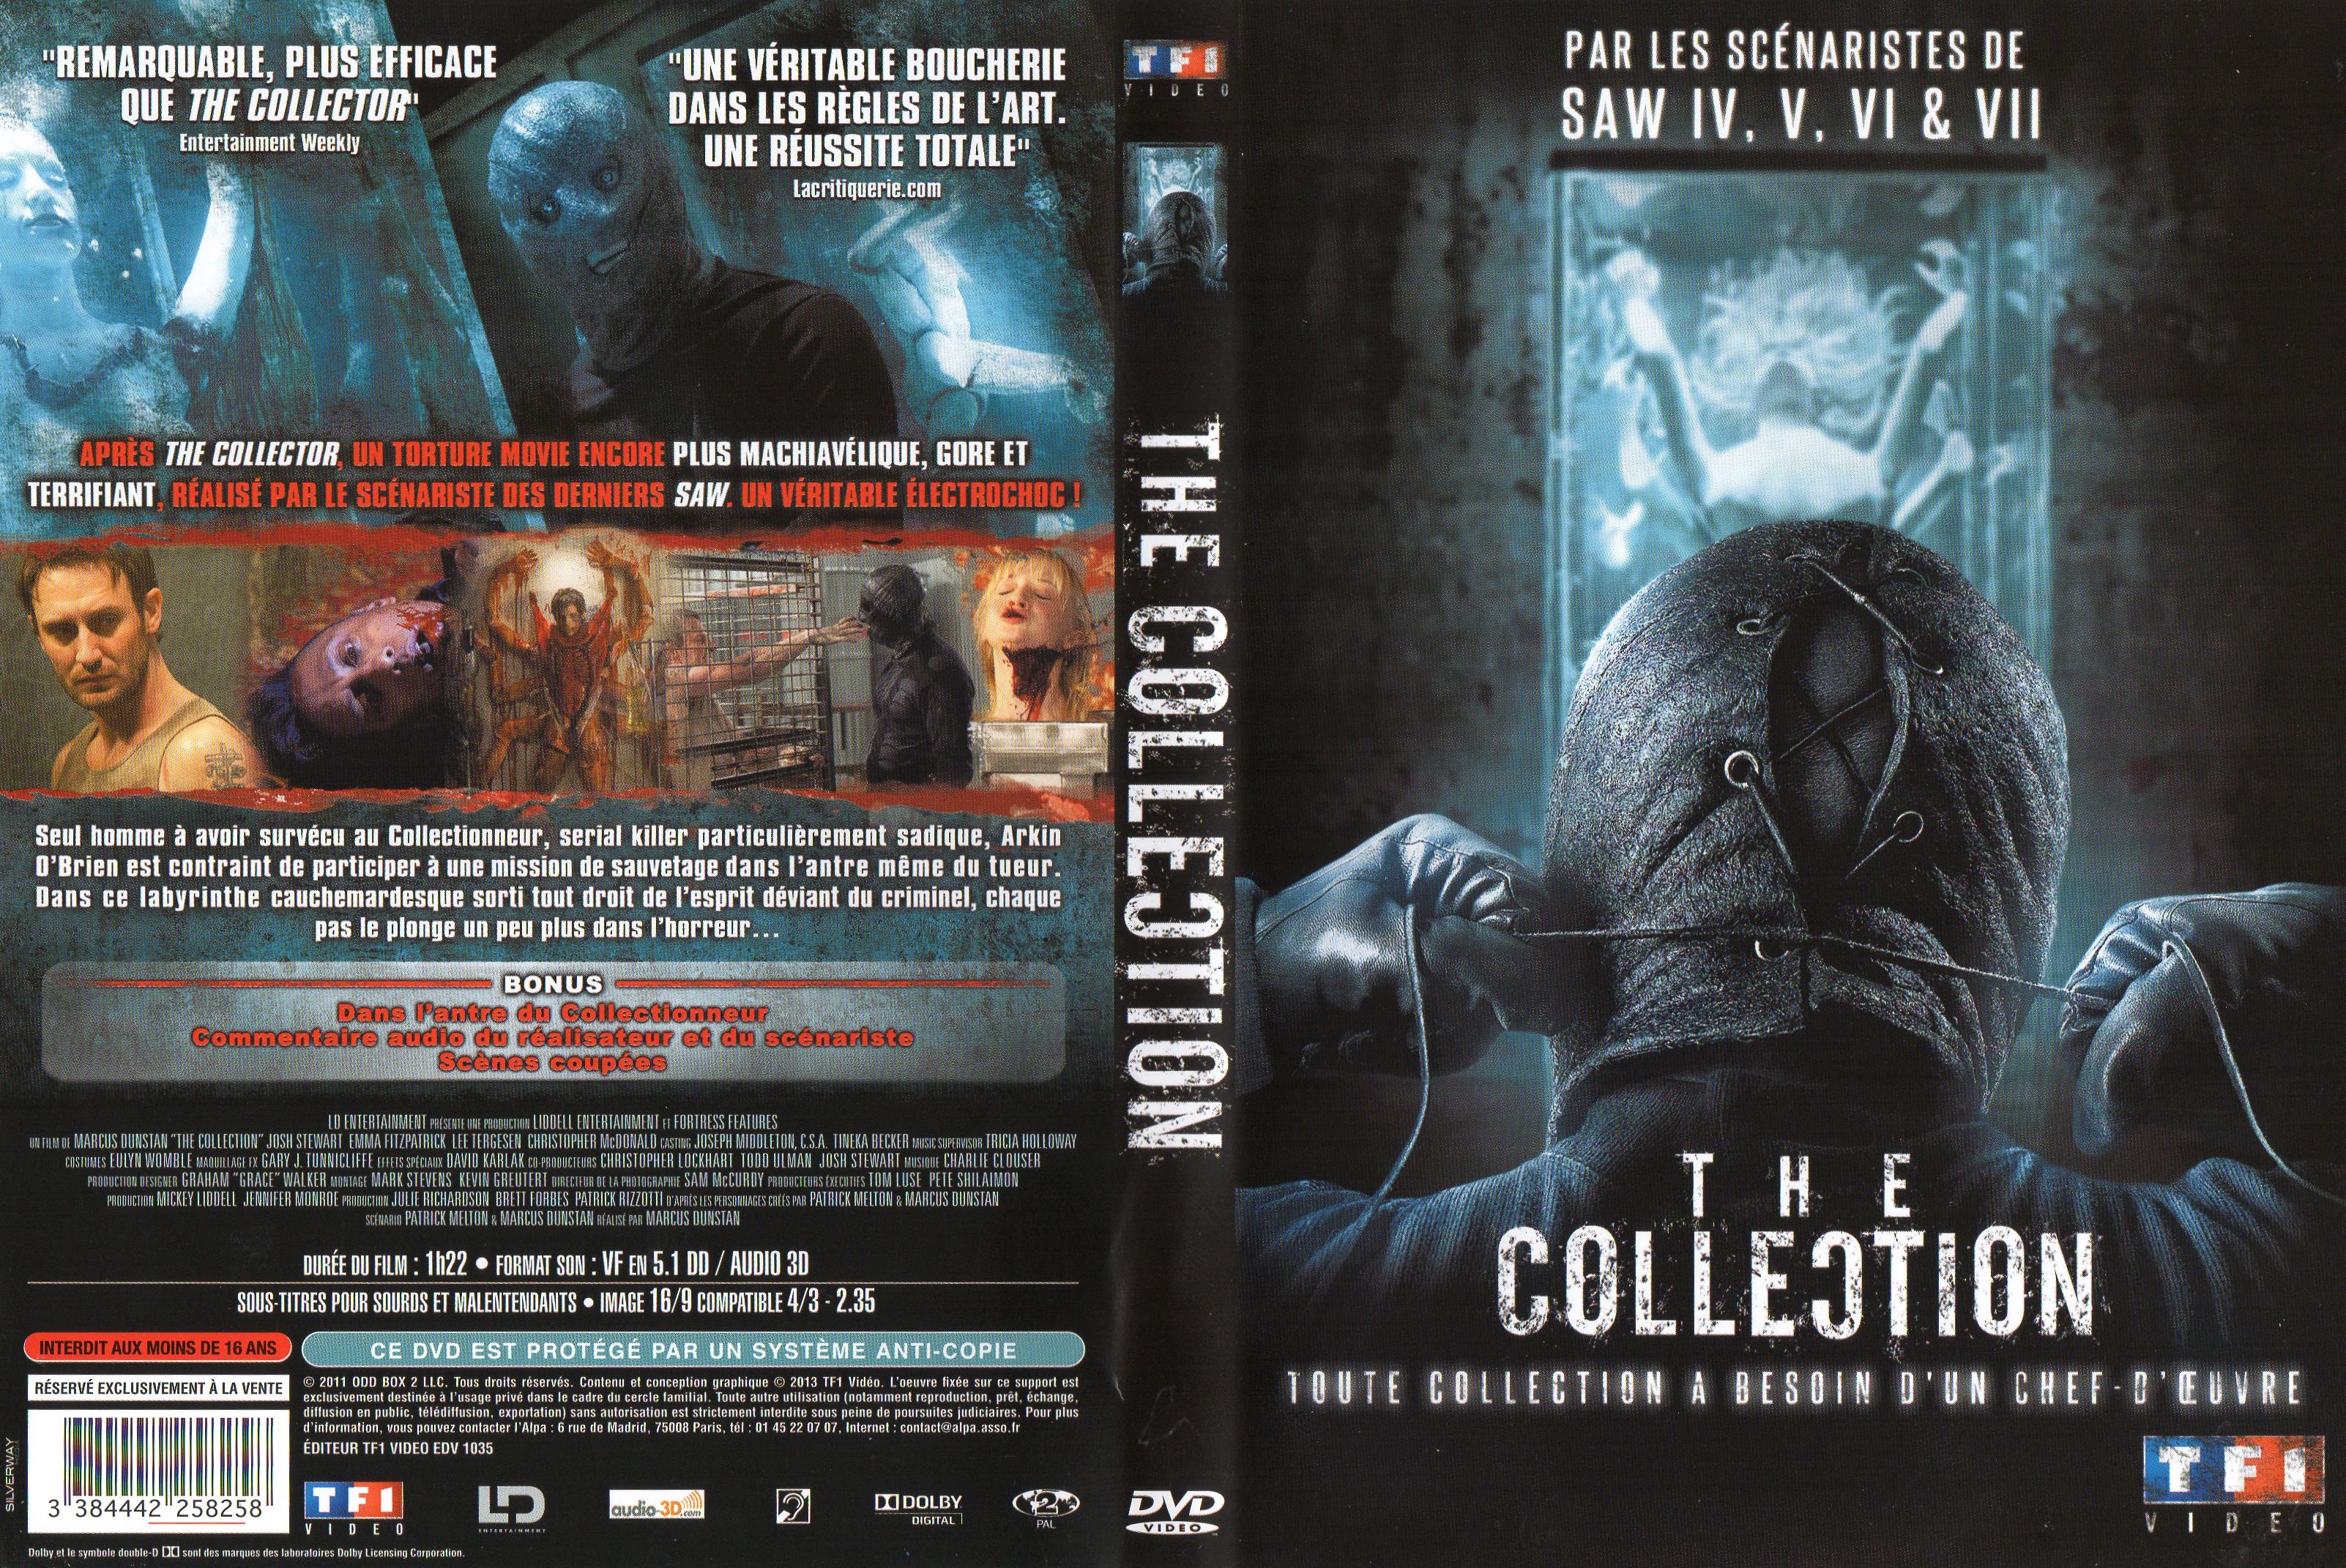 Jaquette DVD The collection